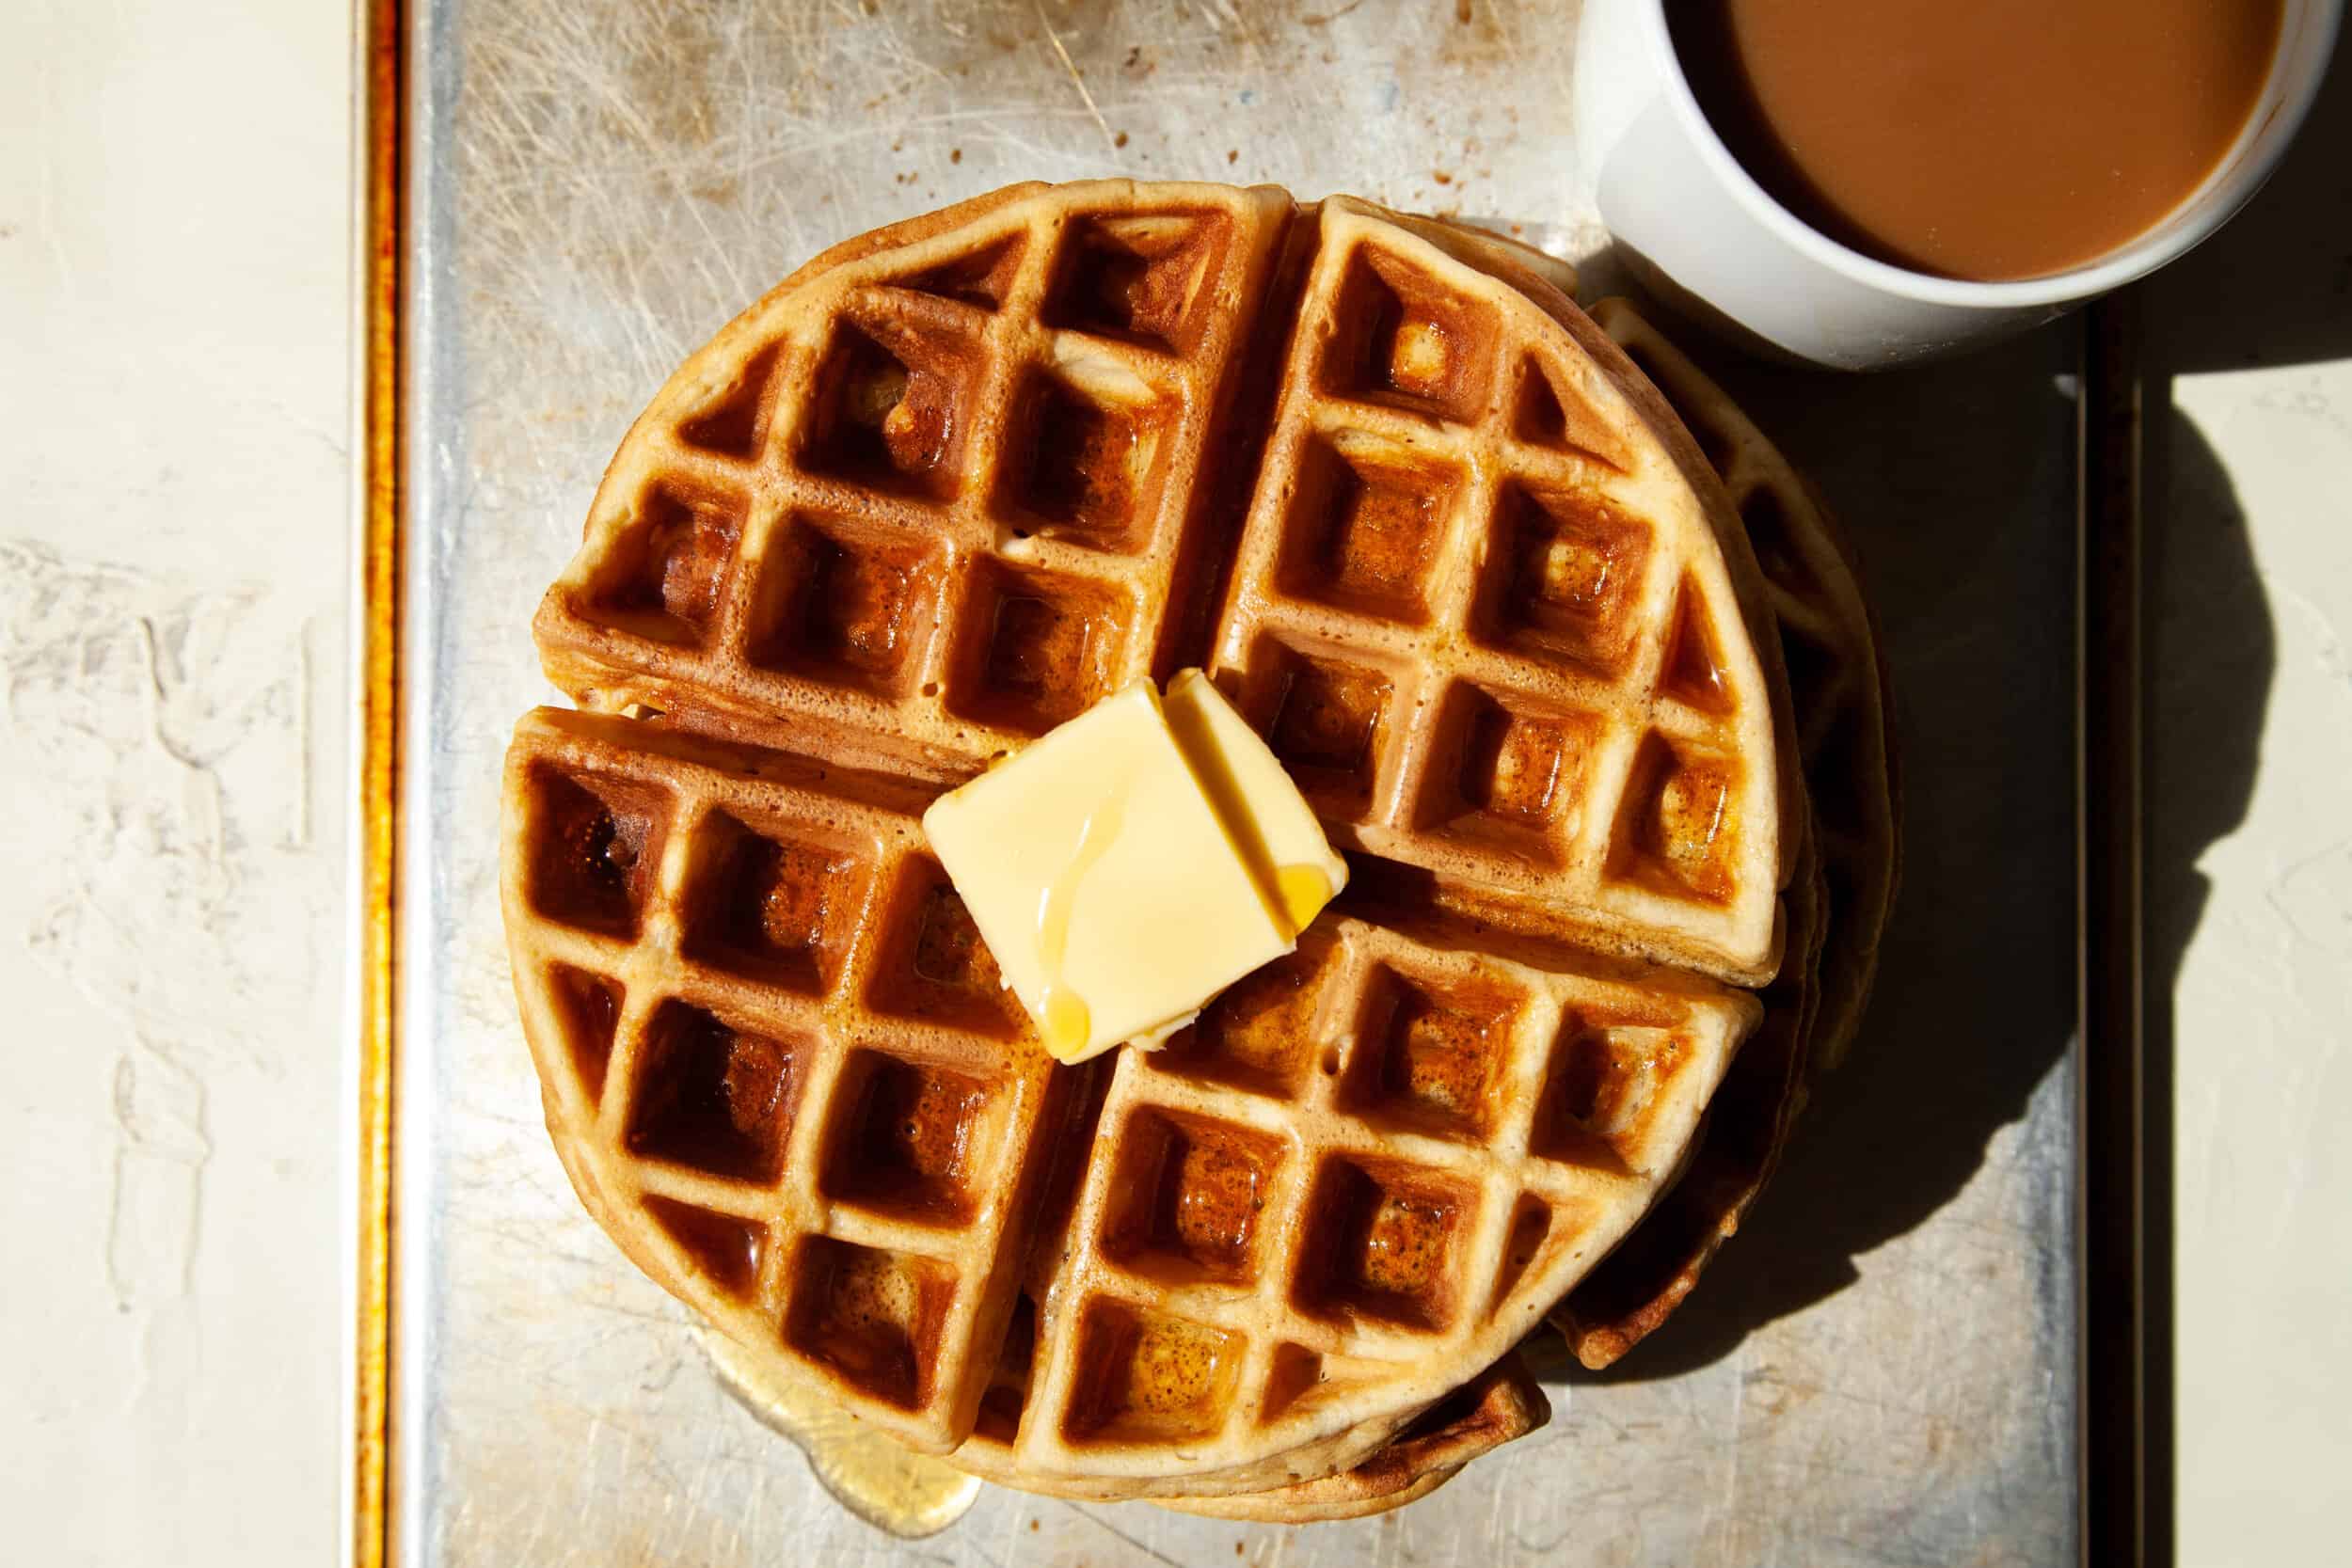 Waffles with butter, syrup, and coffee